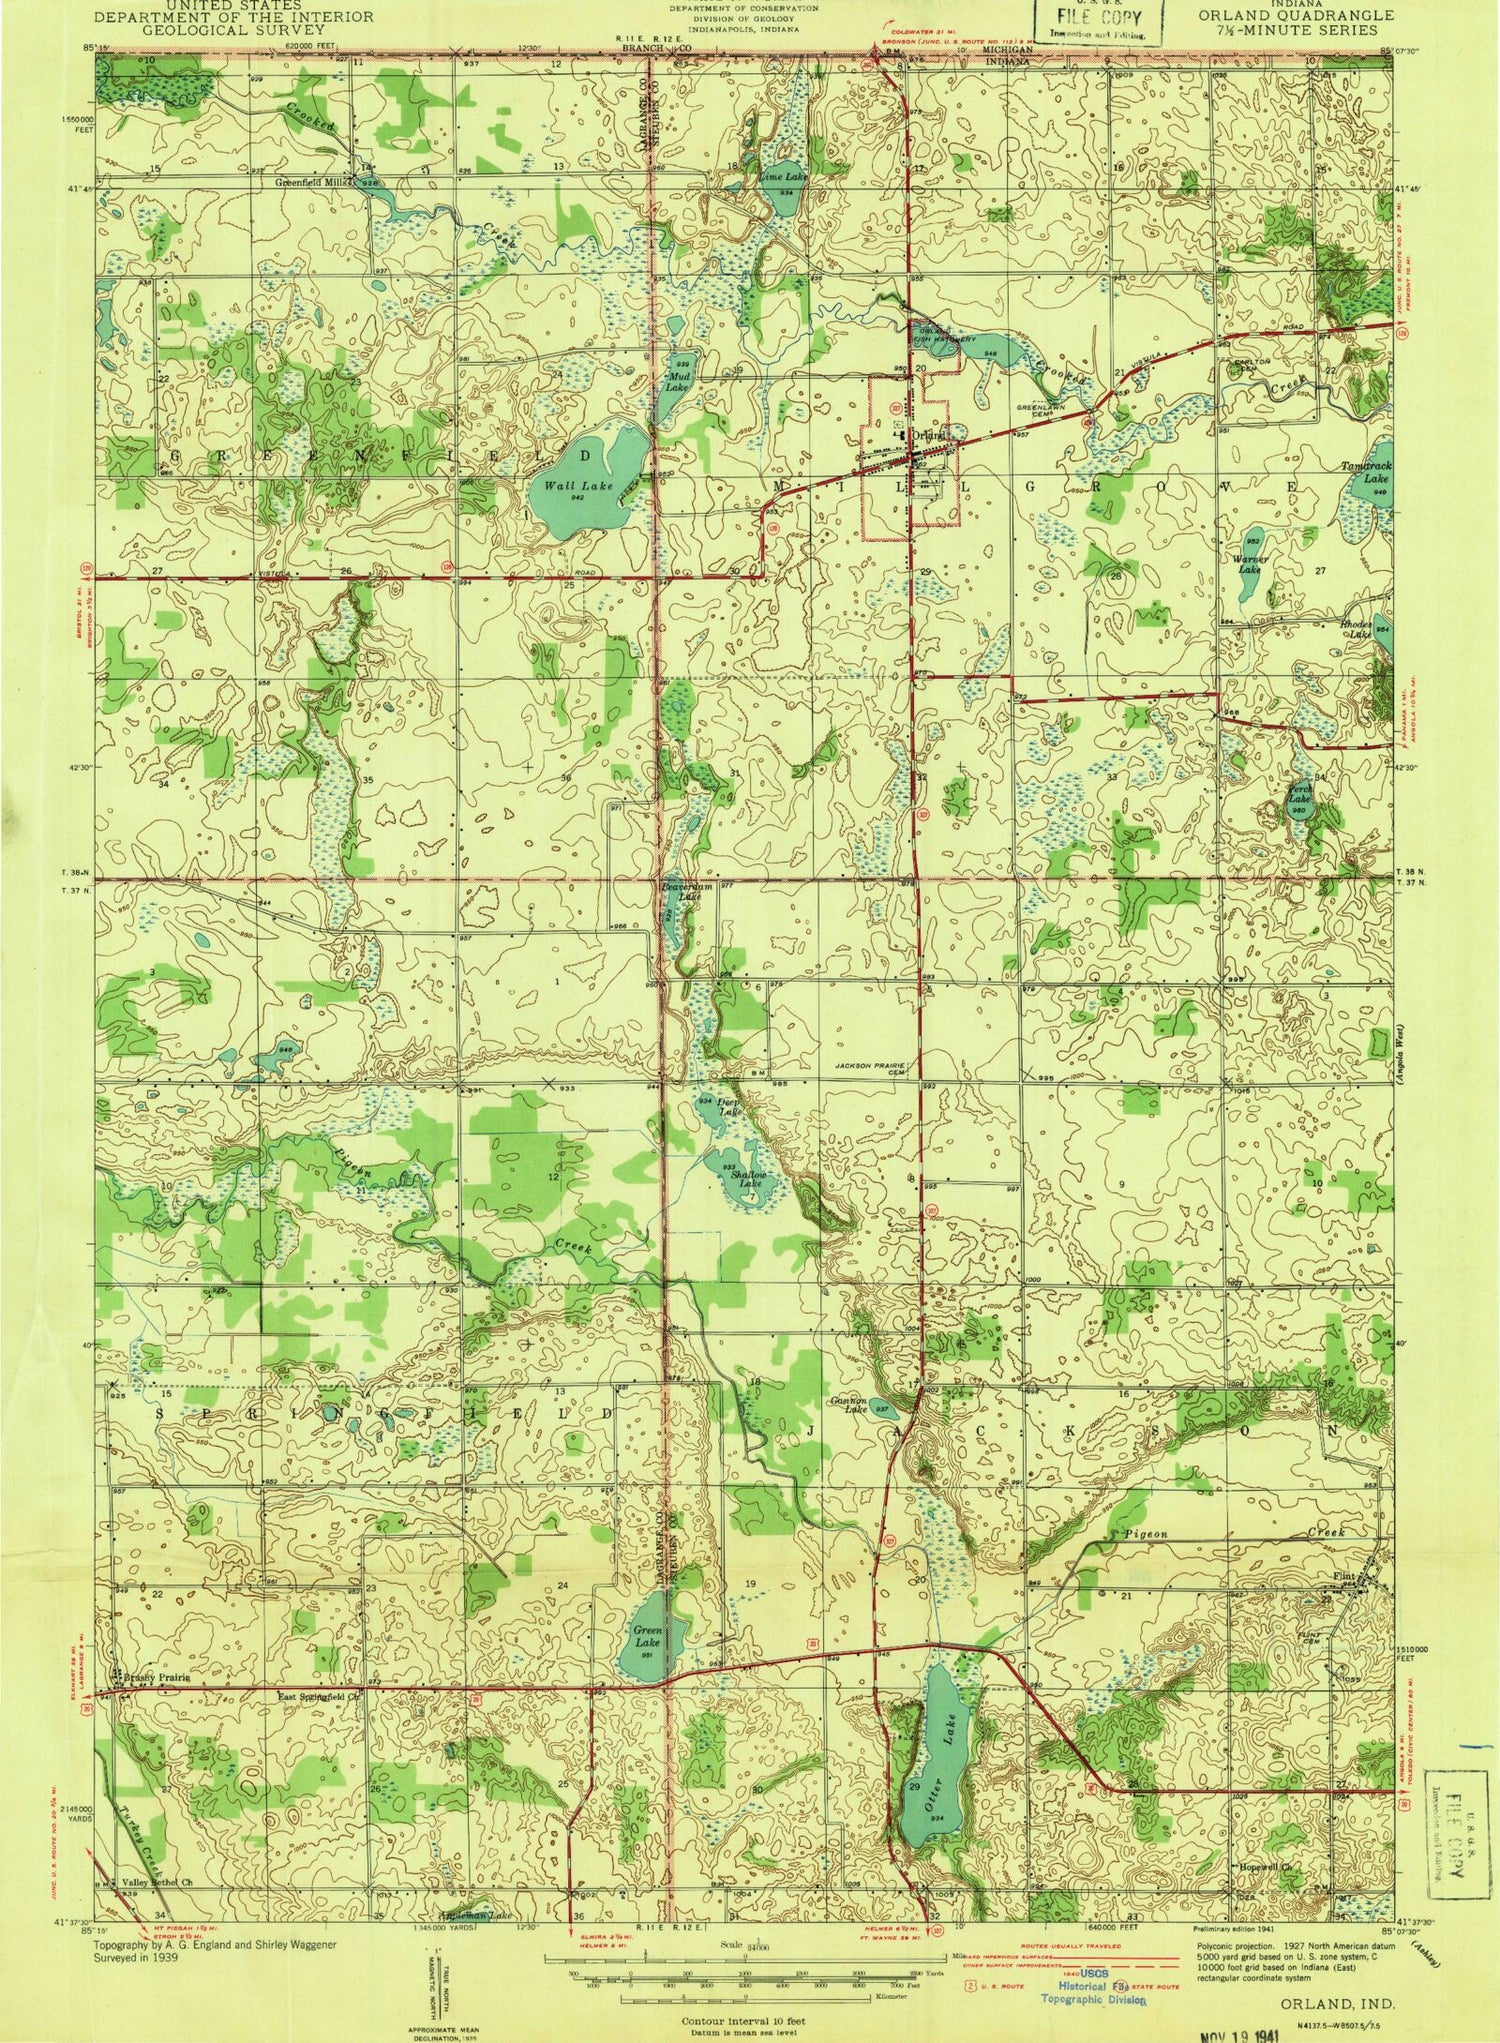 Classic USGS Orland Indiana 7.5'x7.5' Topo Map Image